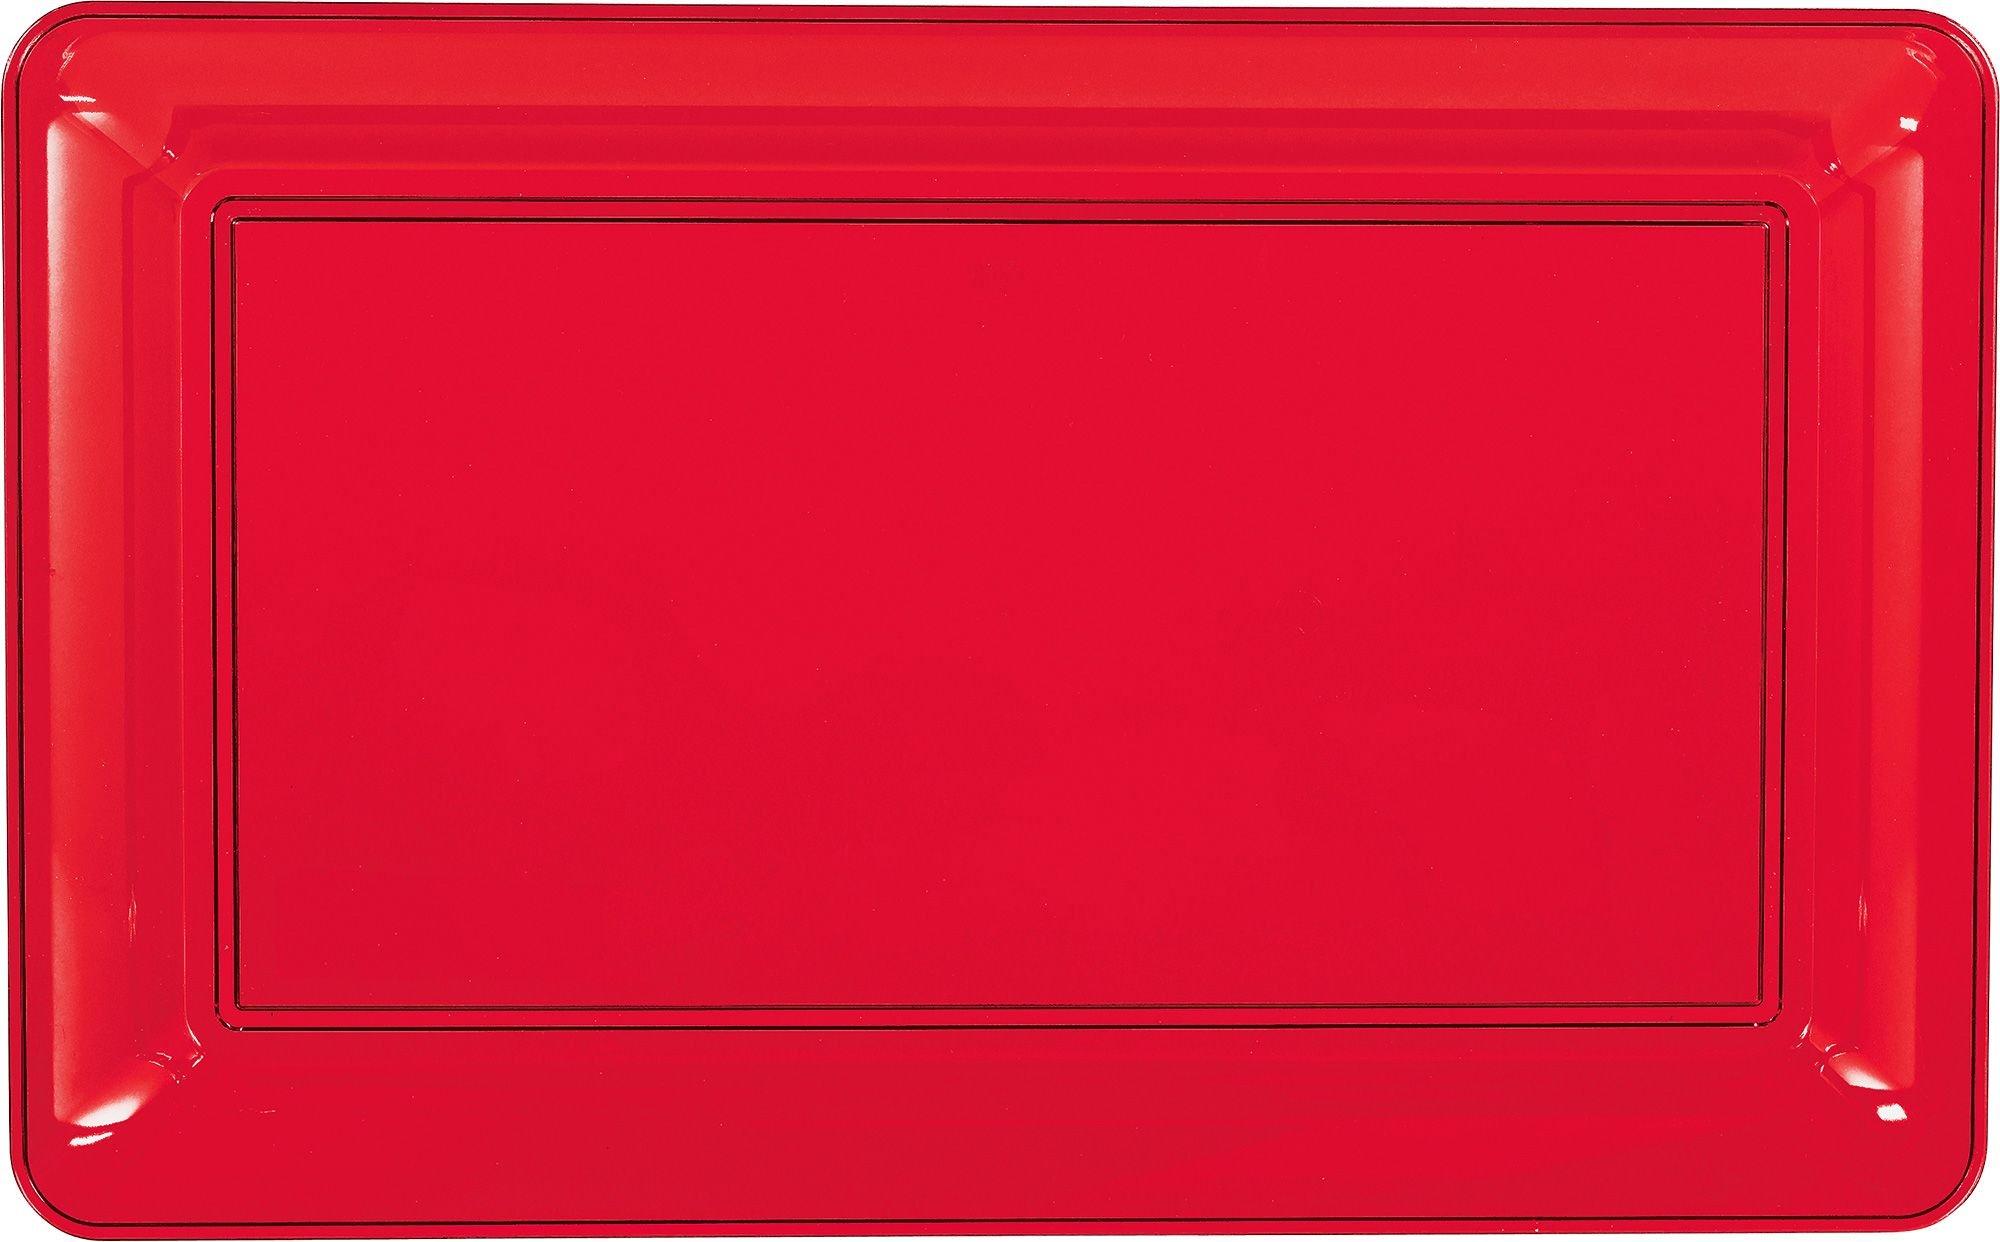 Caterer's Corner Red Plastic Serving Trays, 13x8-in.